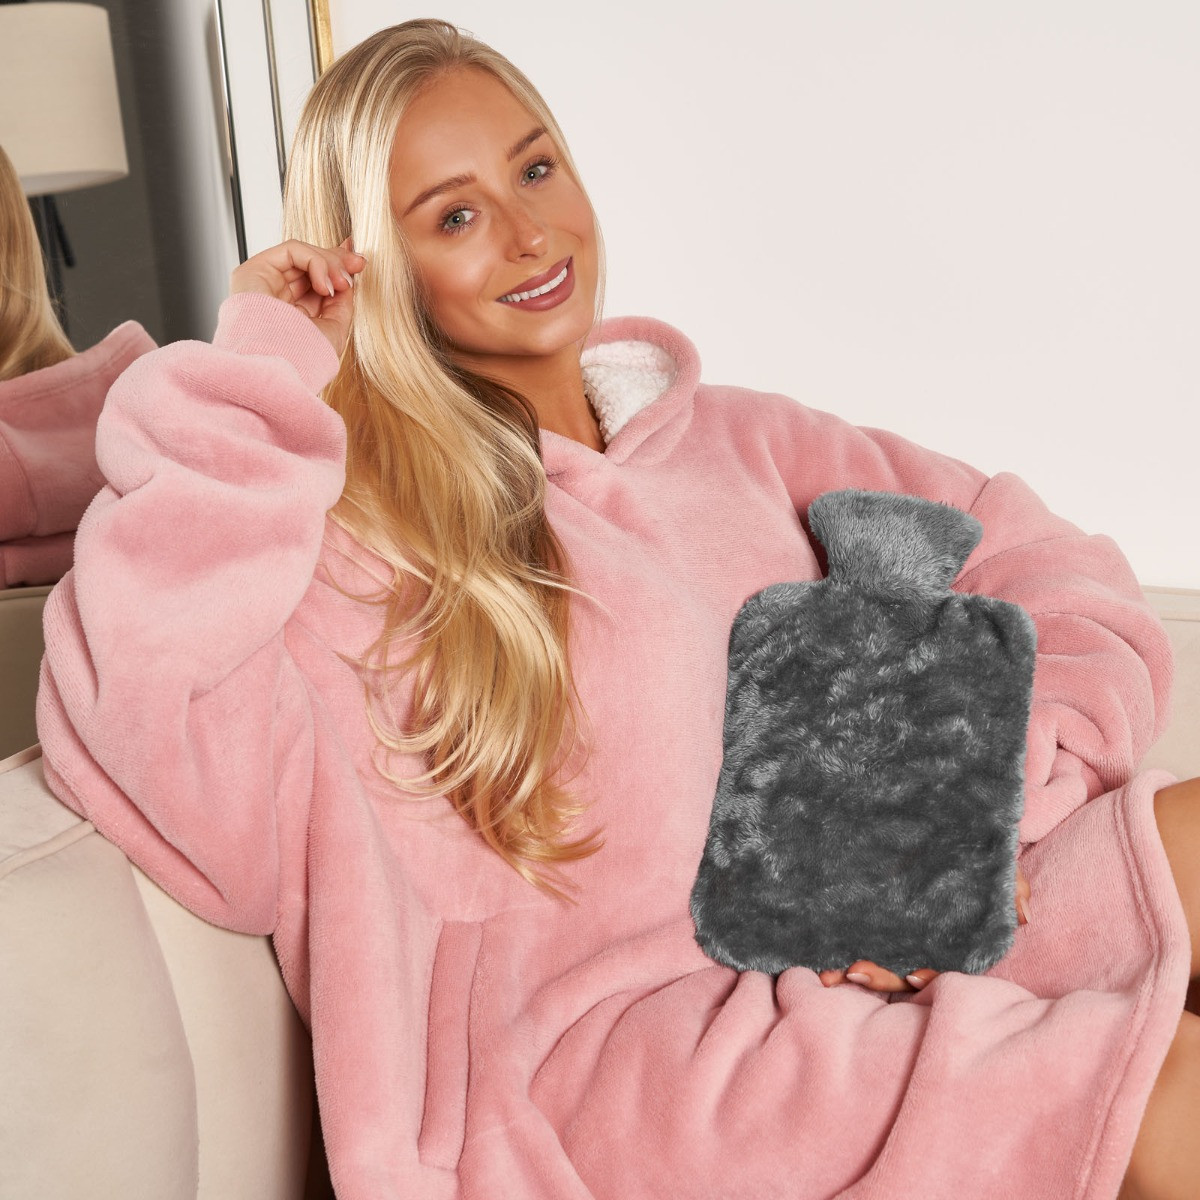 OHS Teddy Hot Water Bottle - Charcoal>